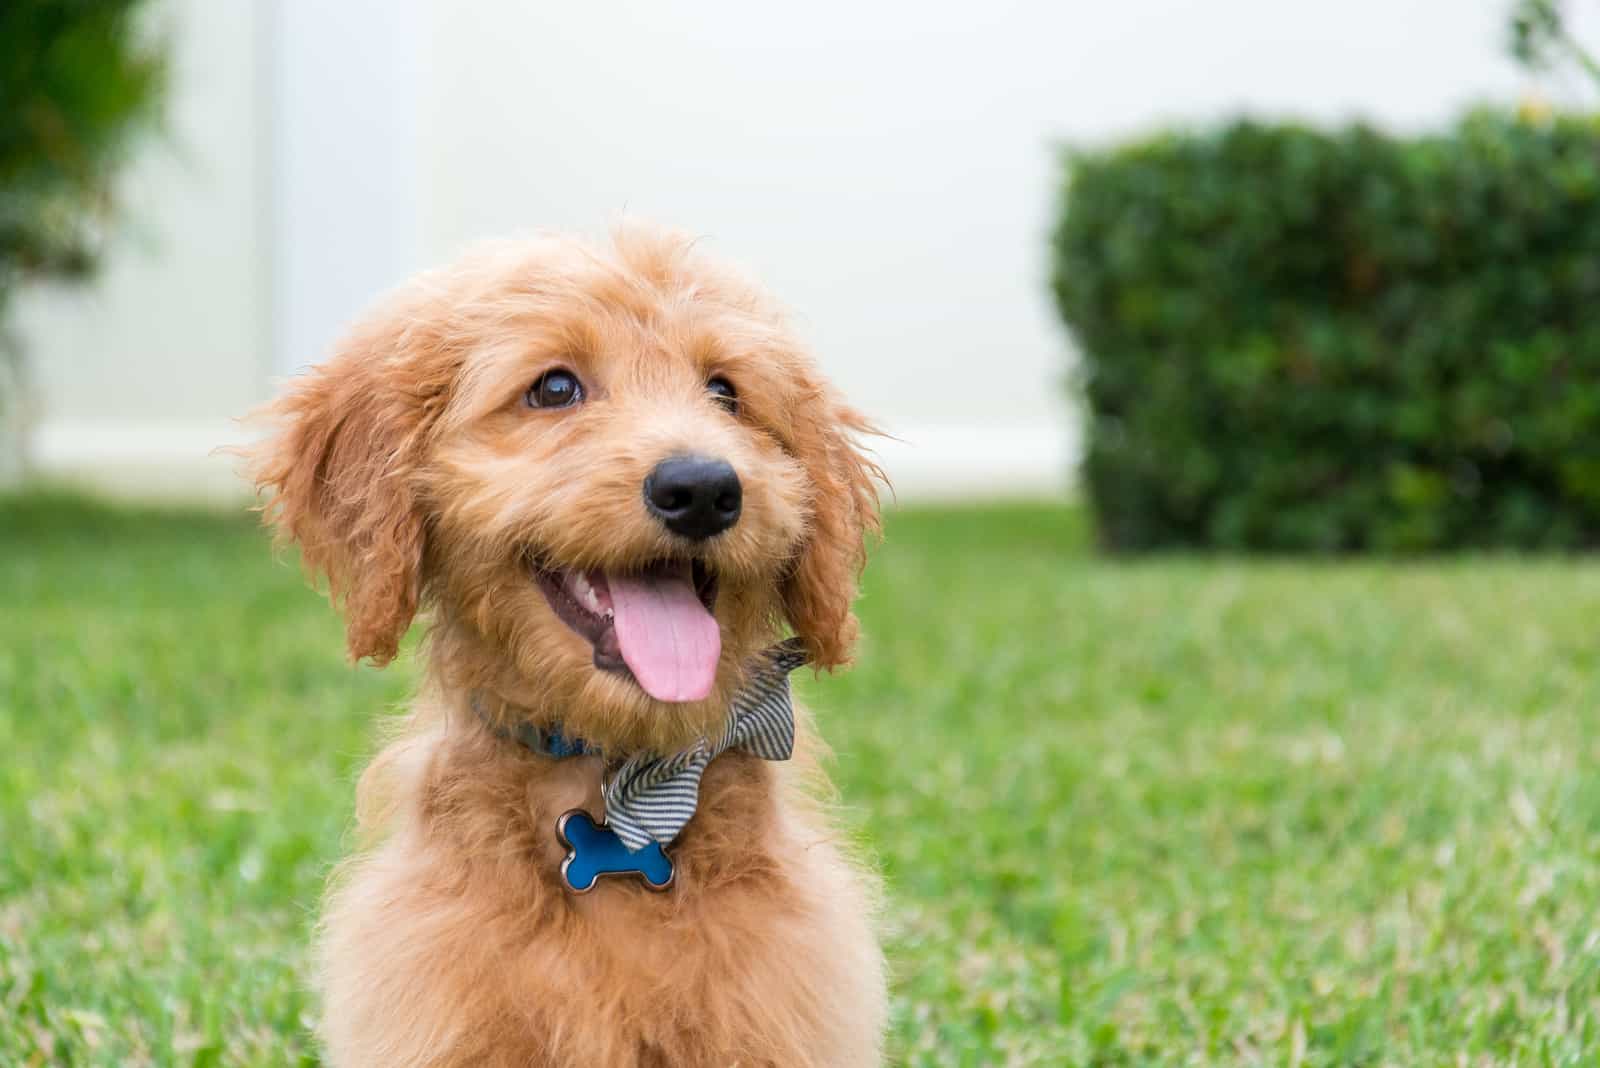 cute goldendoodle with bow tie sitting on grass